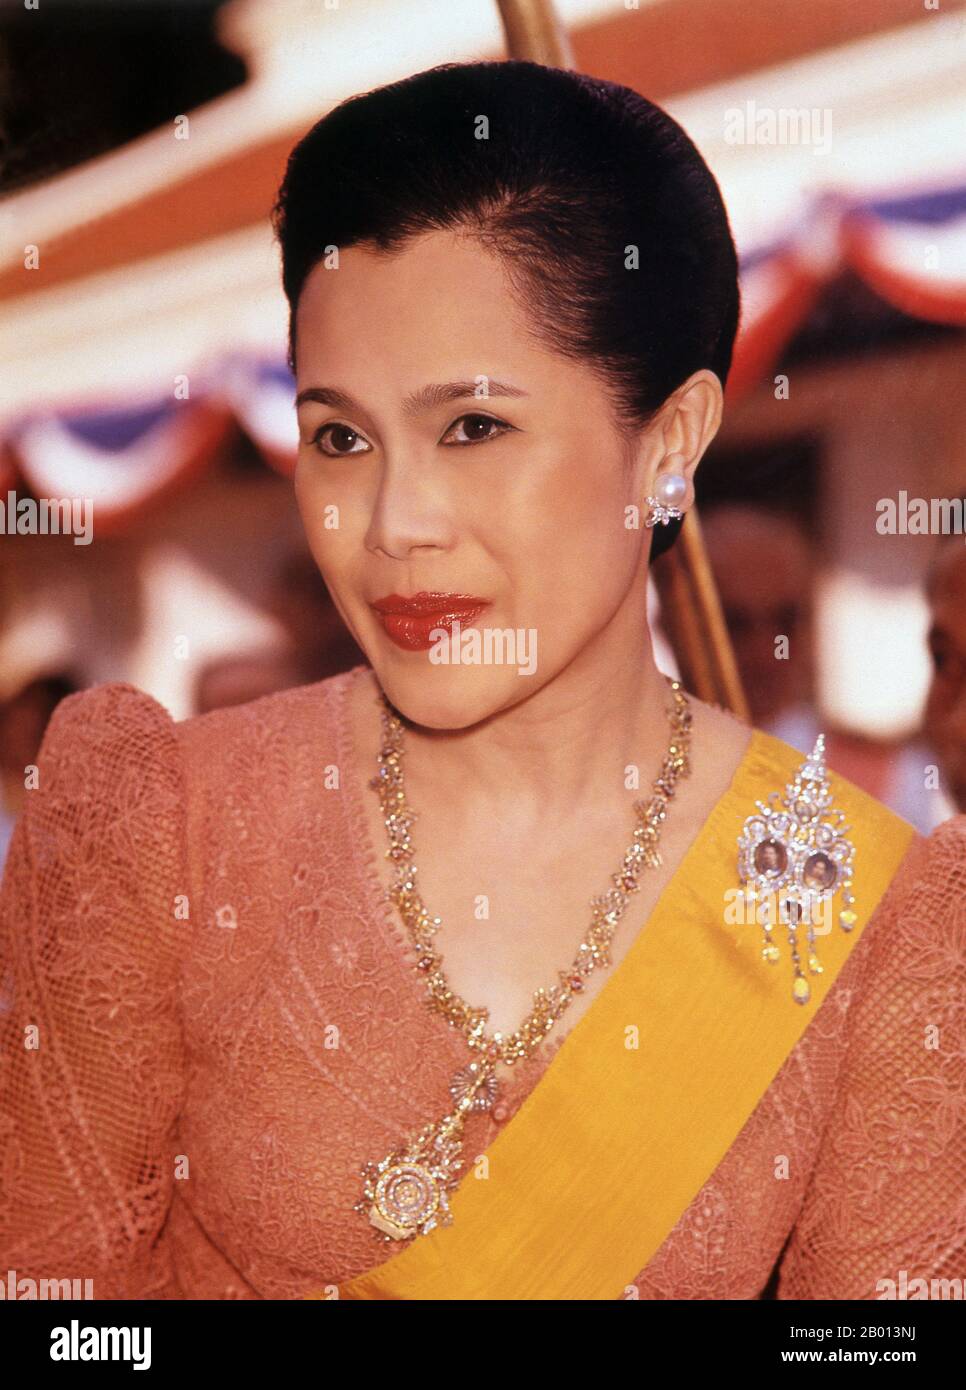 Thailand: Queen Sirikit (12th August 1932 - ), consort of Bhumibol Adulyadej (Rama IX), King of Thailand, c. 1970s.  Somdet Phra Nang Chao Sirikit Phra Borommarachininat, born Mom Rajawongse Sirikit Kitiyakara on August 12, 1932), is the queen consort of Bhumibol Adulyadej, King (Rama IX) of Thailand. She is the second Queen Regent of Thailand (the first Queen Regent was Queen Saovabha Bongsri of Siam, later Queen Sri Patcharindra, the queen mother). She suffered a stroke on 21 July 2012, and has not been seen in public since. Stock Photo